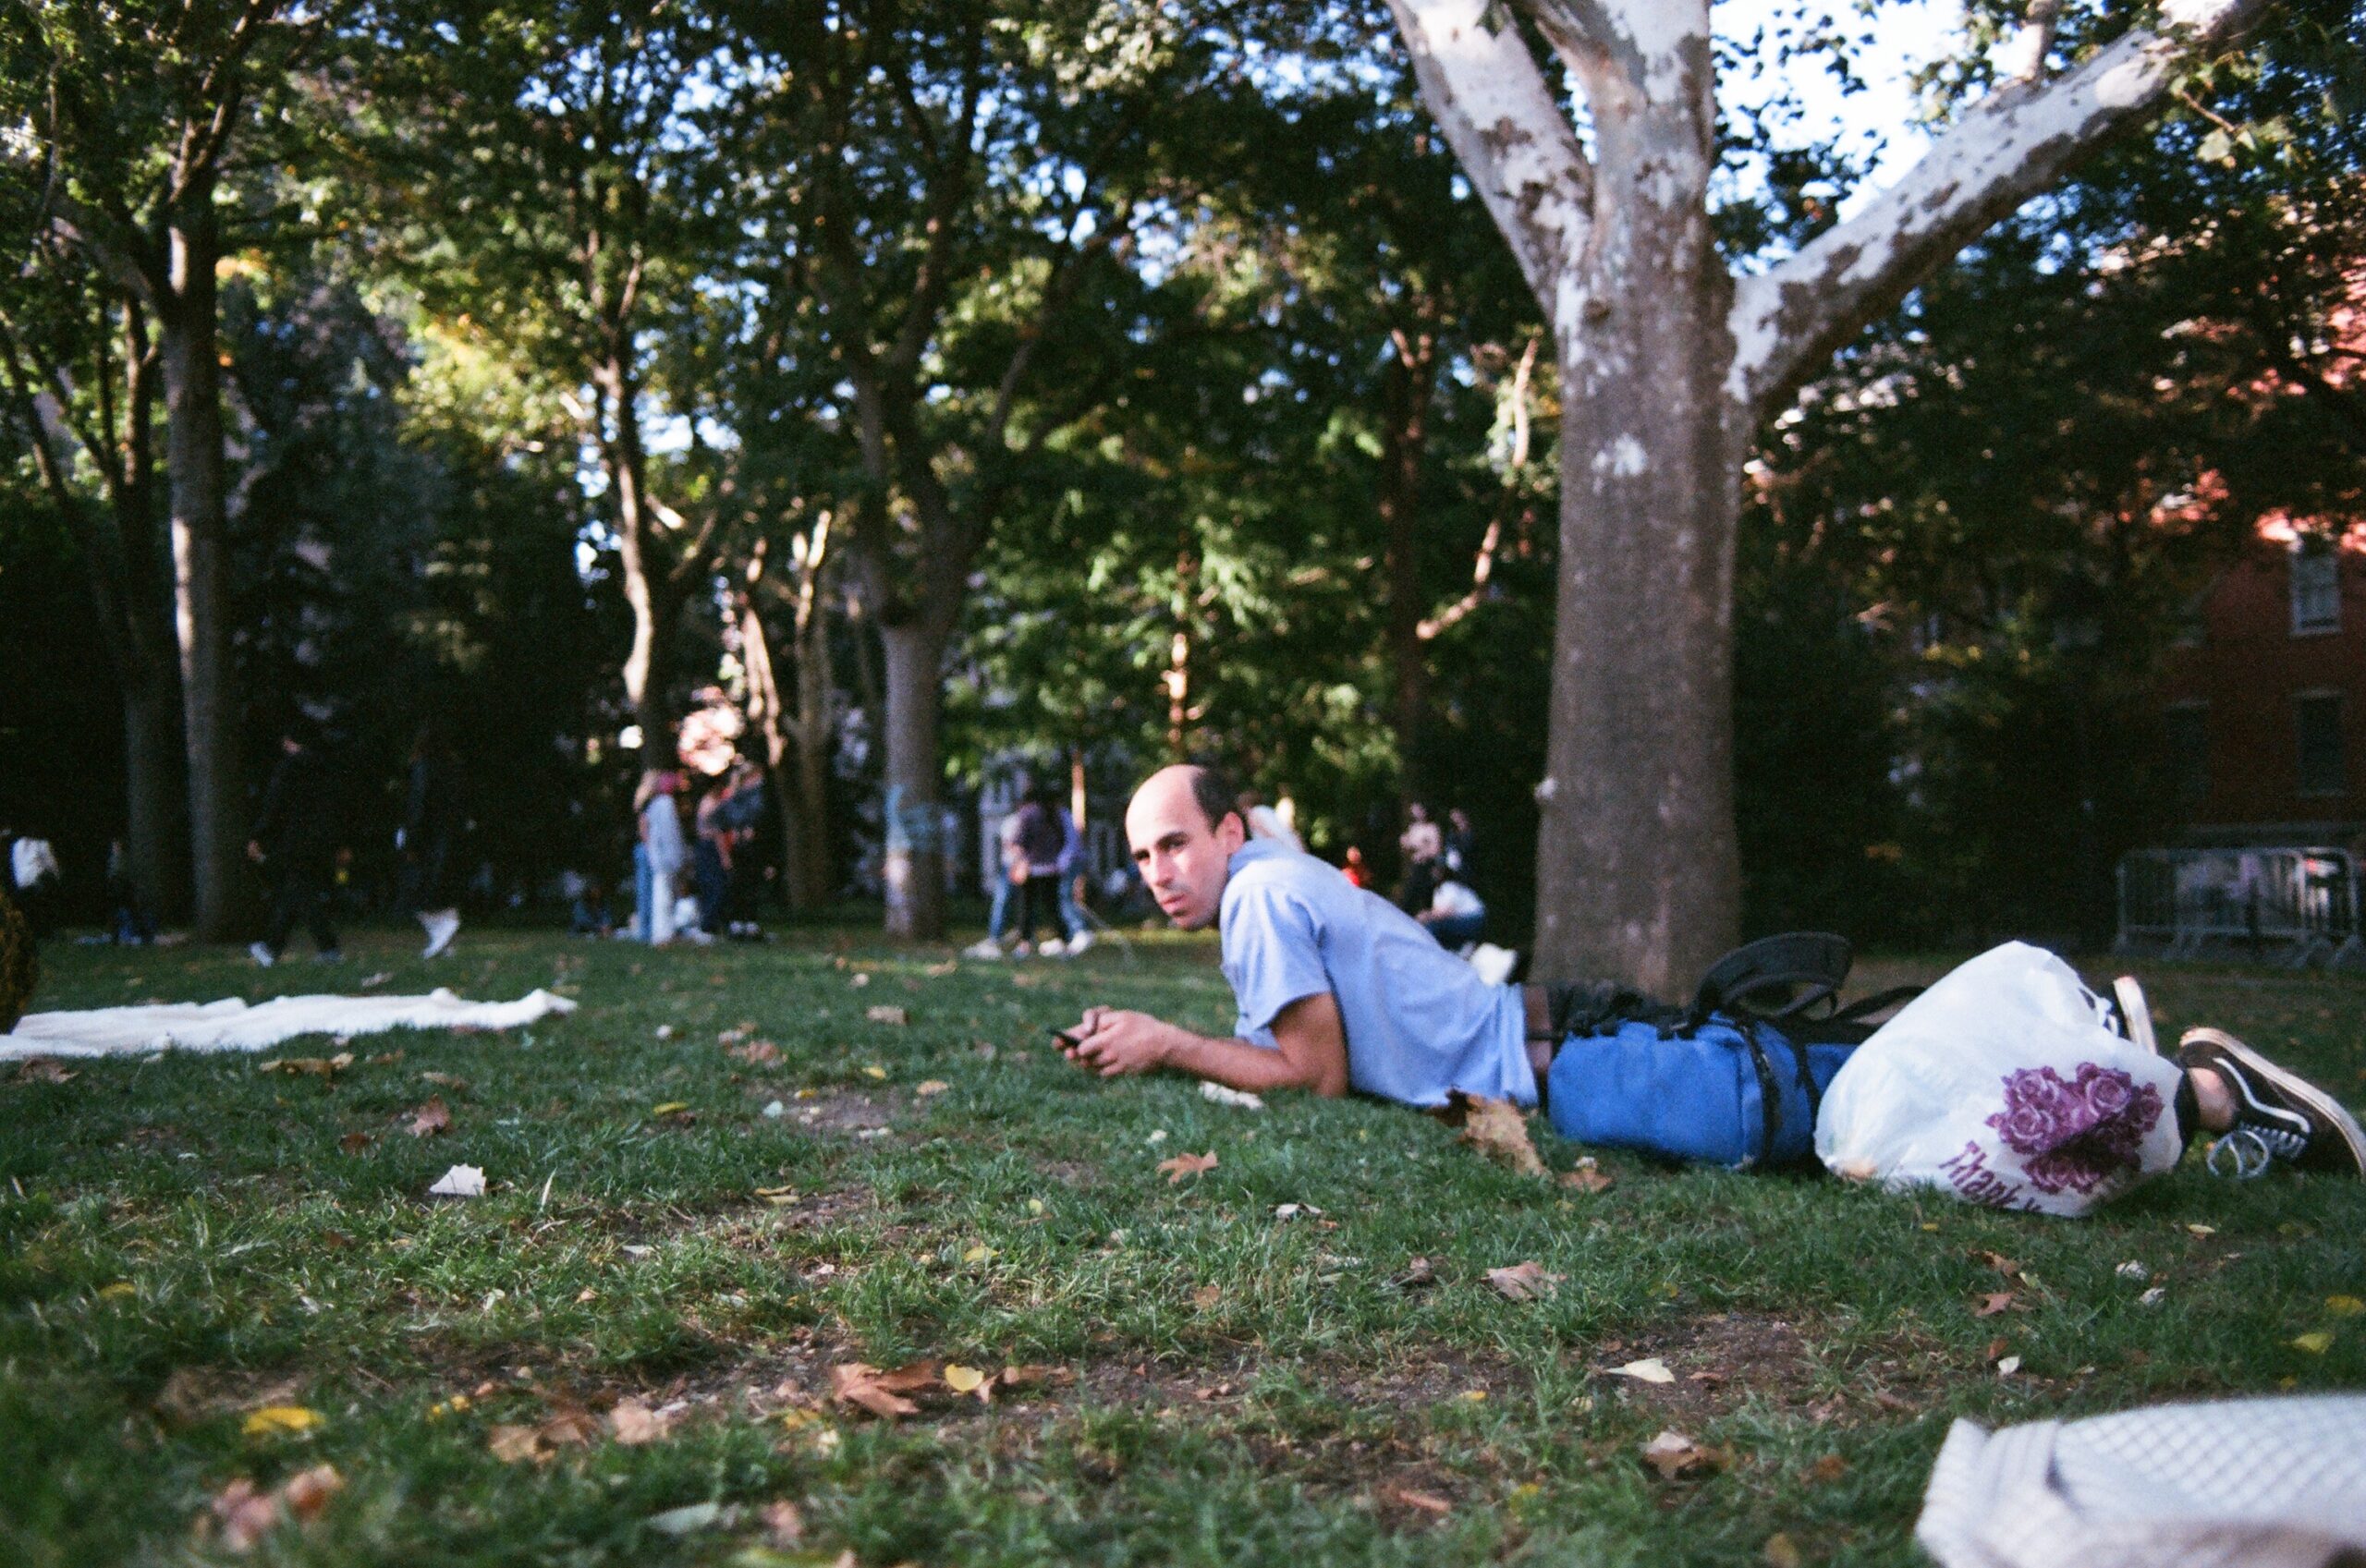 Man laying down in grass at park.